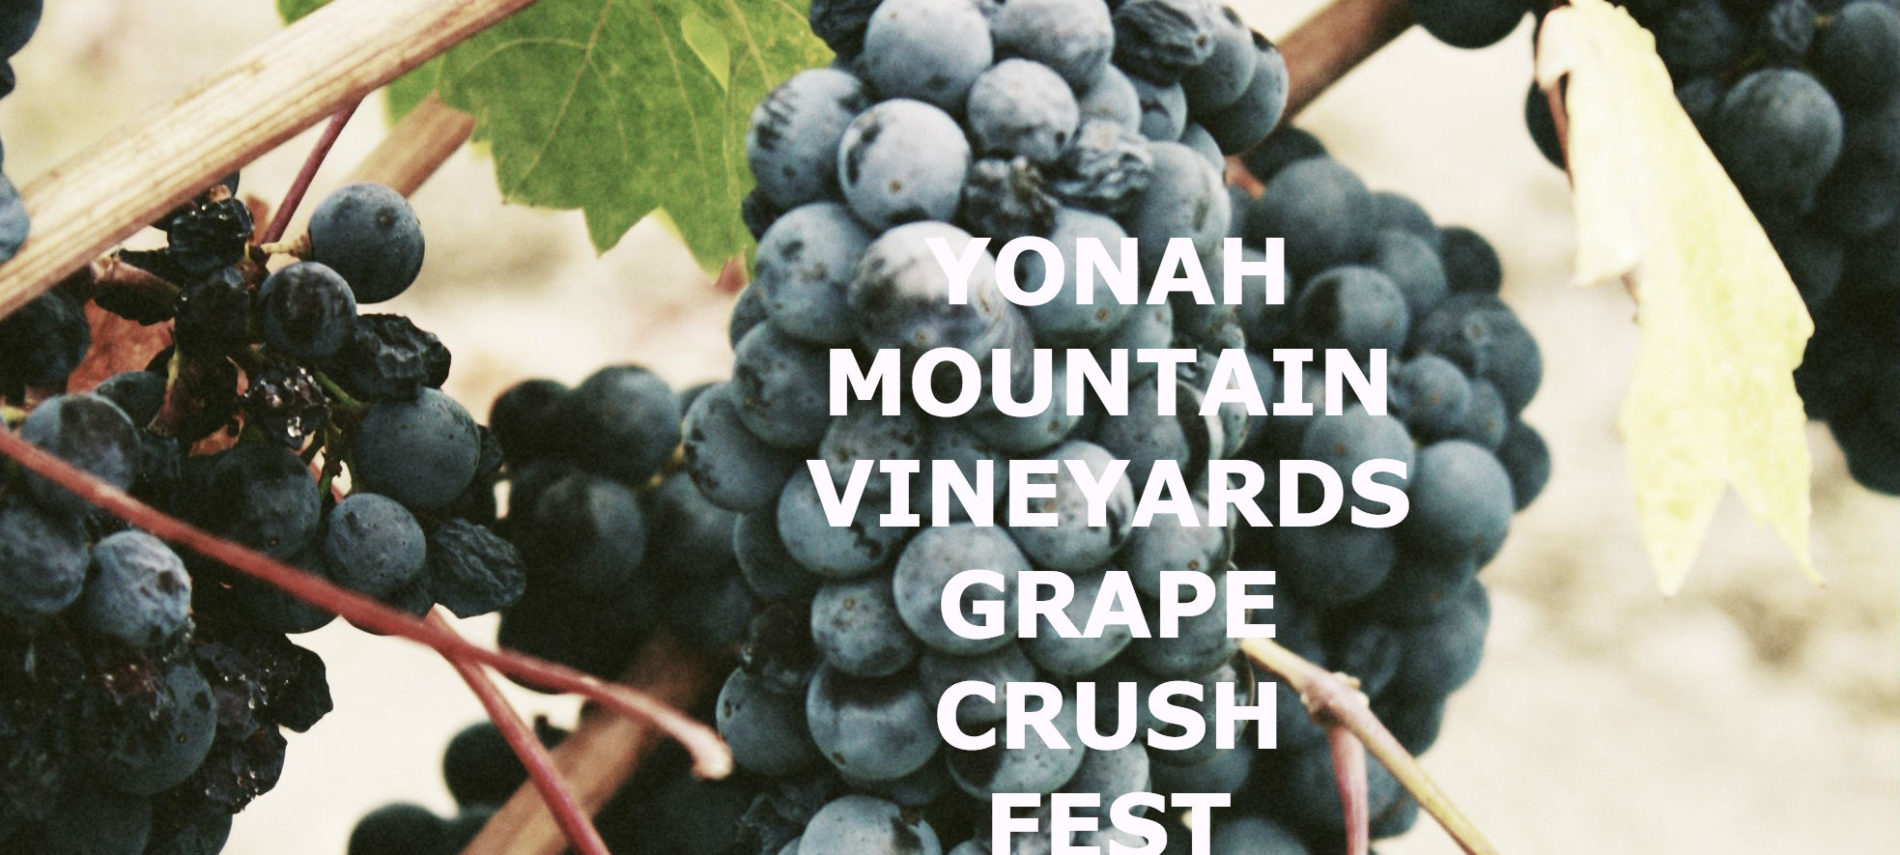 Close-Up photo of purple grapes with Wine Fest Title. Yonah mountain vineyards grape crush fest